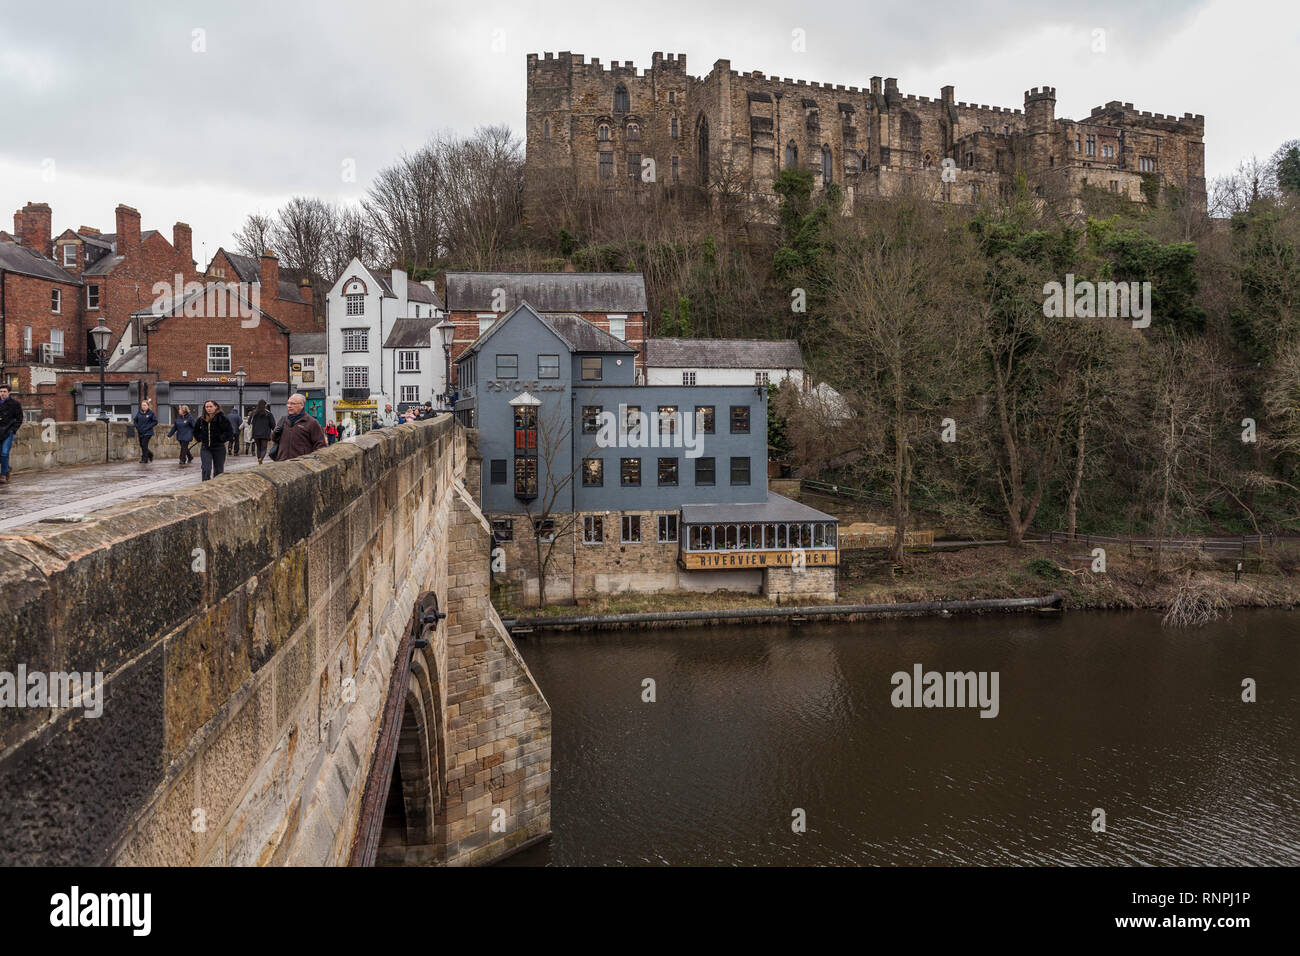 A view across Framwellgate Bridge and the Castle (University College) in the background at Durham,England,UK Stock Photo